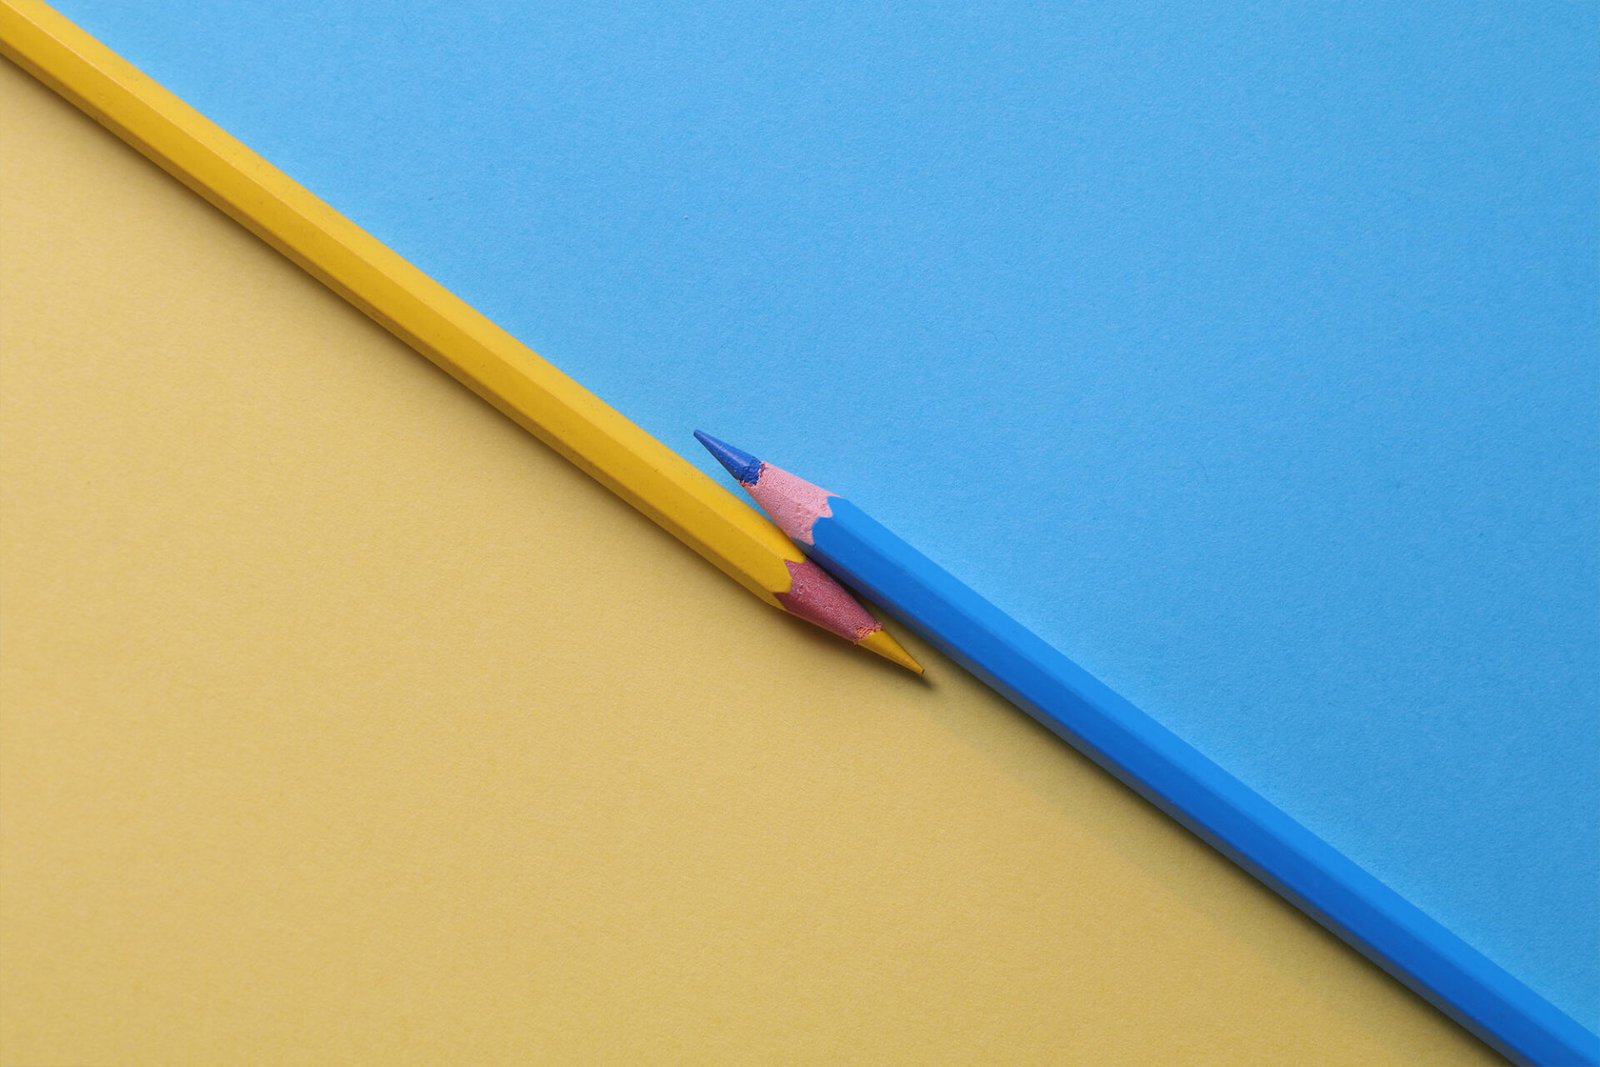 A creative design of one yellow and one blue pencil with yellow and blue background